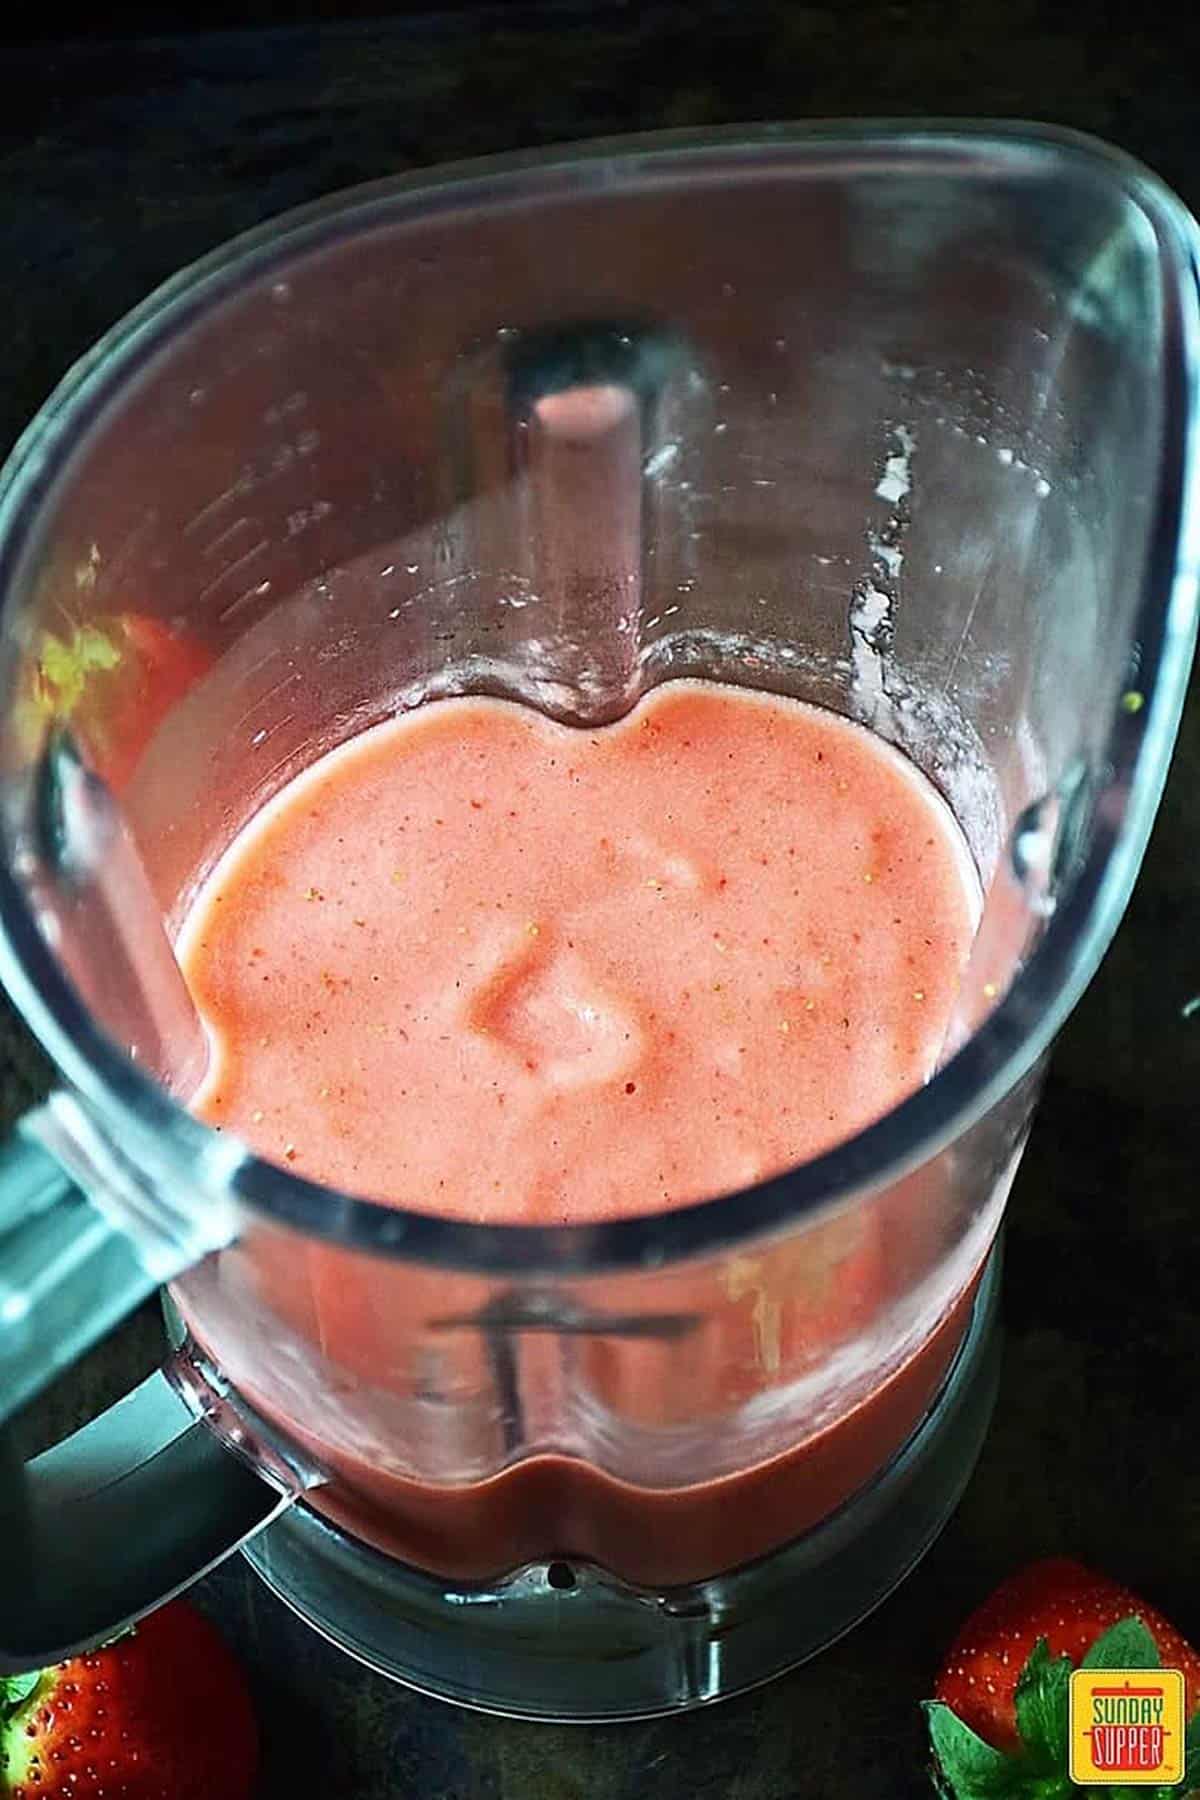 Blended strawberries and milk